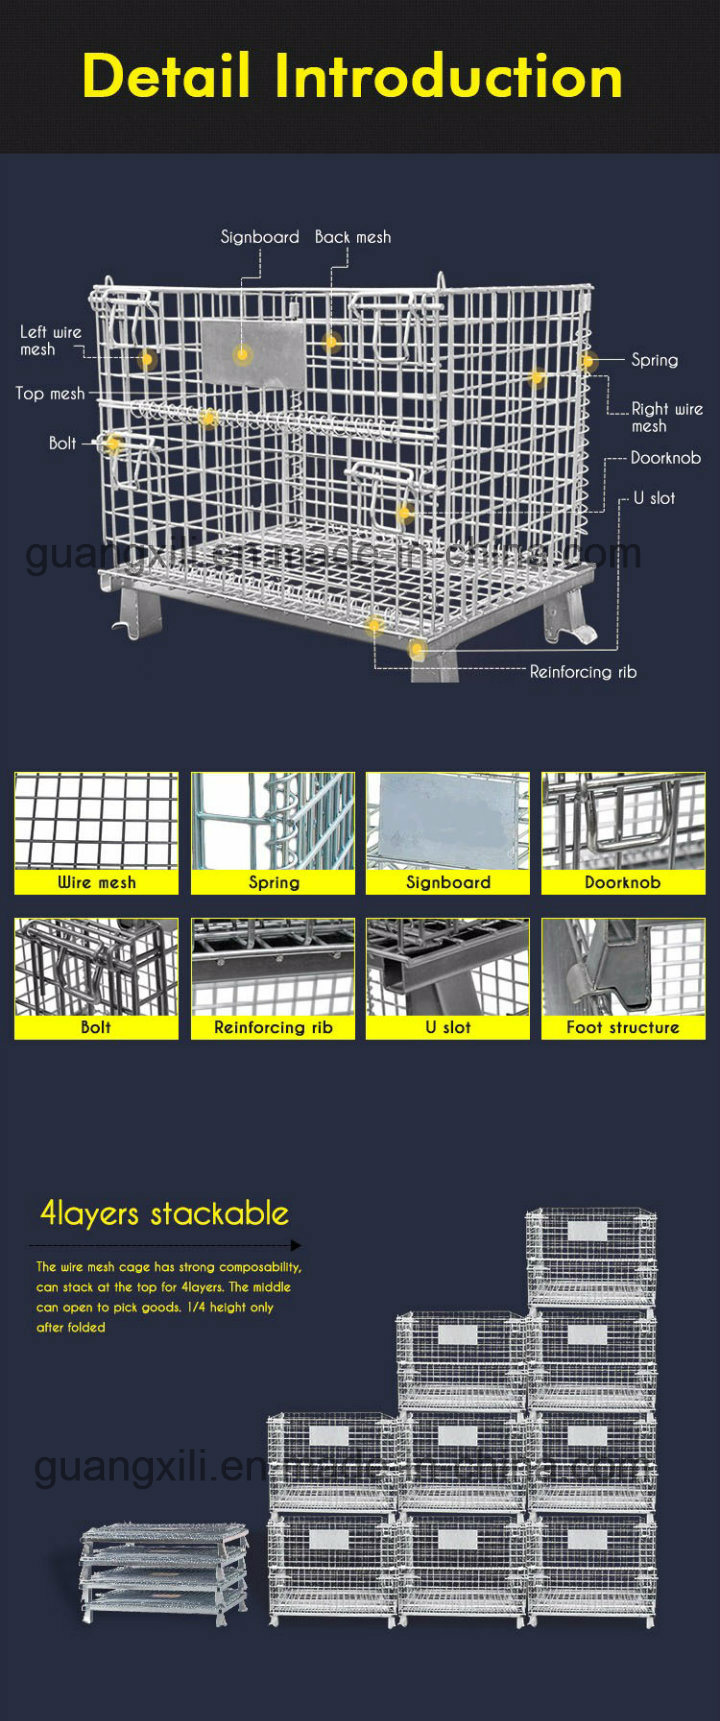 Metal Collapsible Mesh Pallet Cage